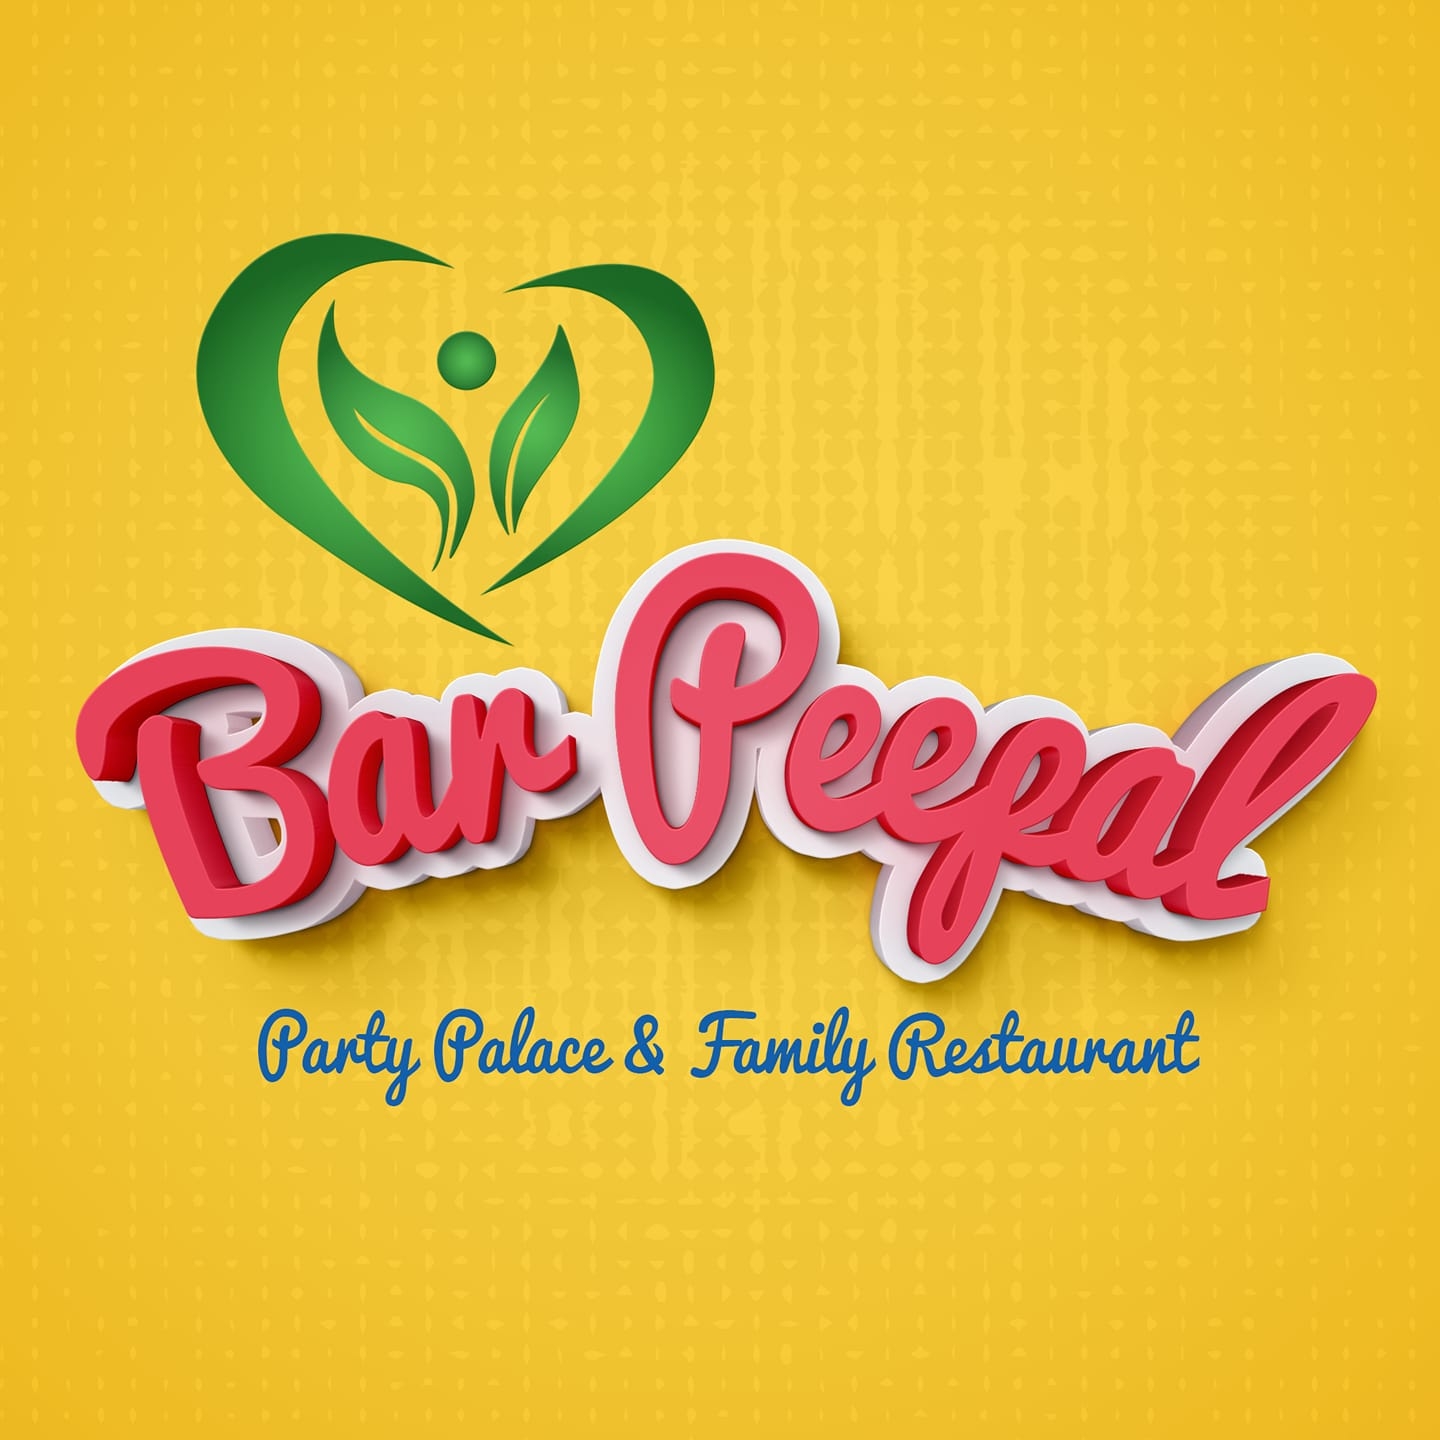 bar peepal party palace and family restaurant 9 